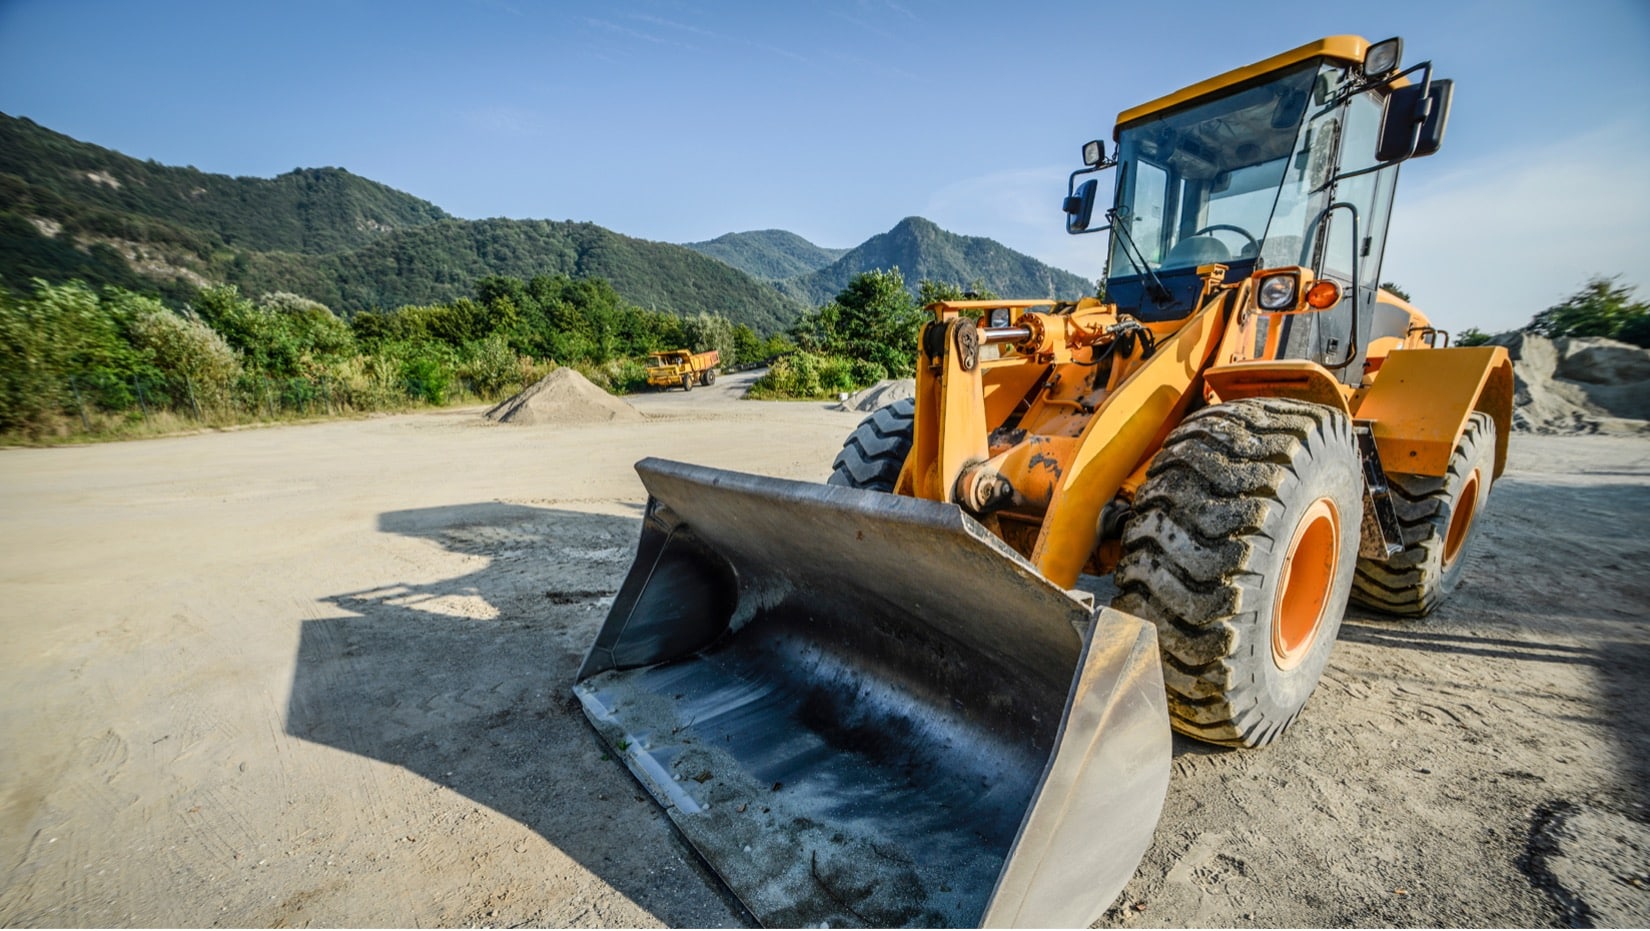 Questions to Ask a SANY Dealer in Kansas City When Buying Used Heavy Equipment